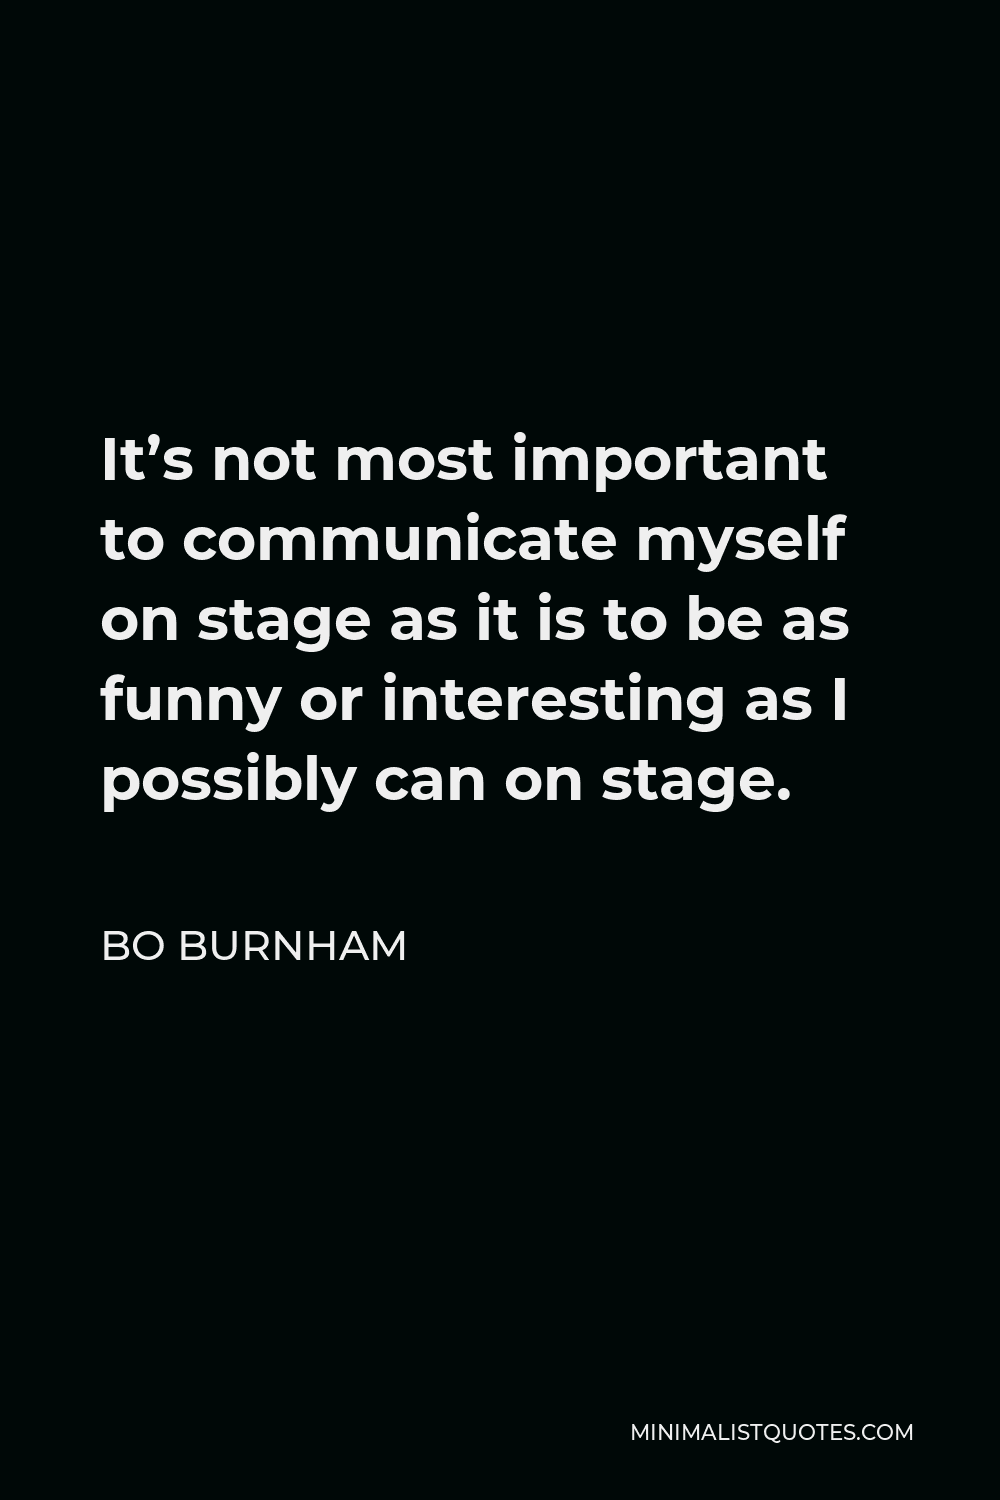 Bo Burnham Quote - It’s not most important to communicate myself on stage as it is to be as funny or interesting as I possibly can on stage.